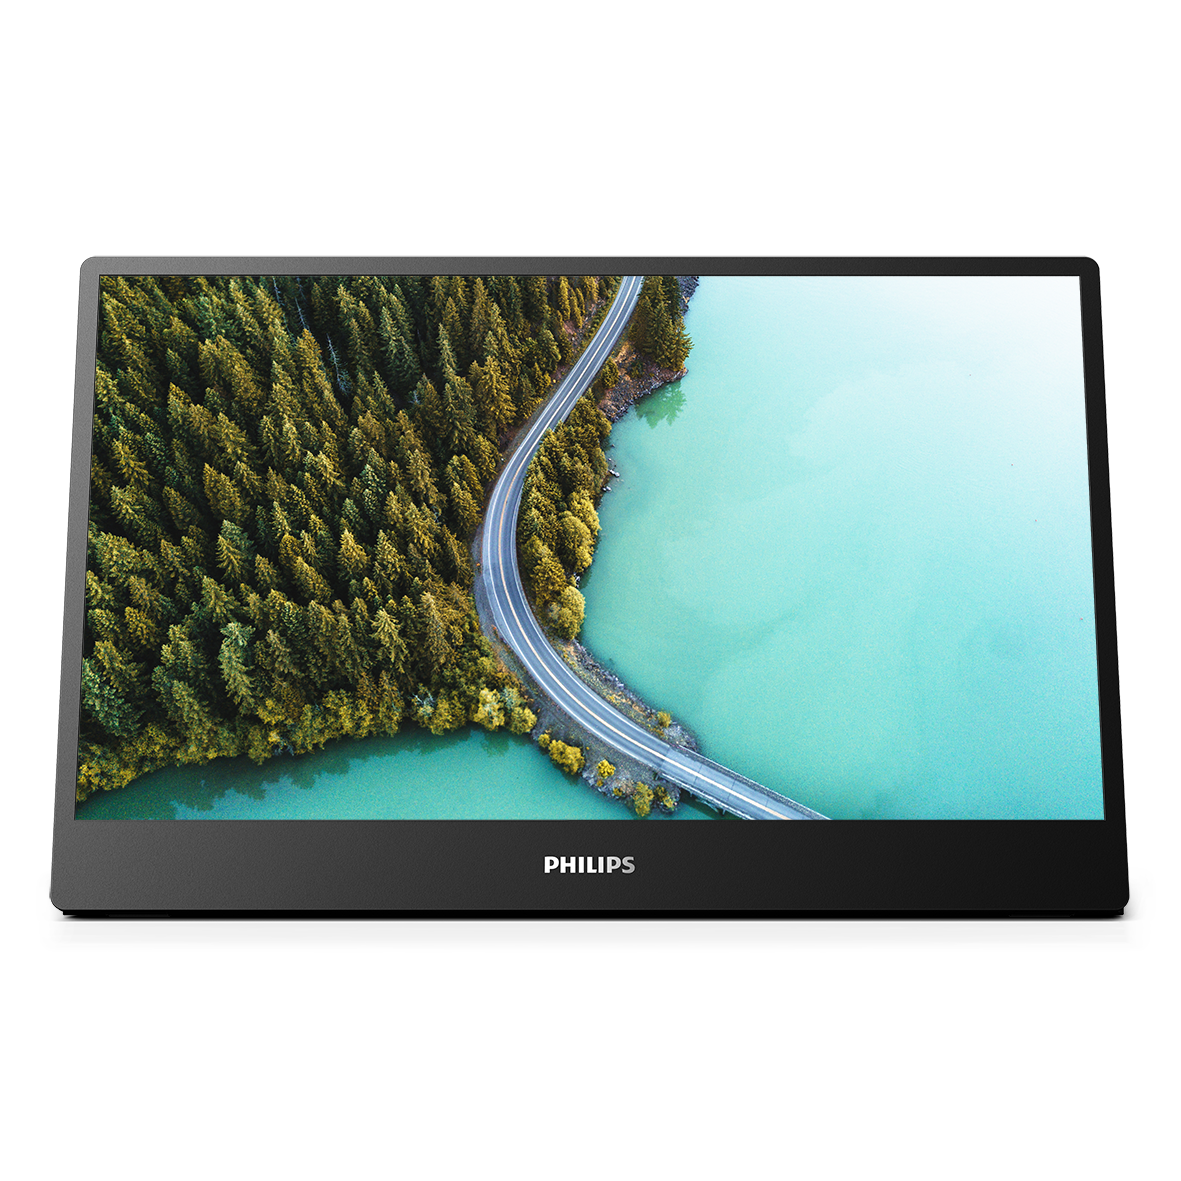 Philips: presents the new portable monitor